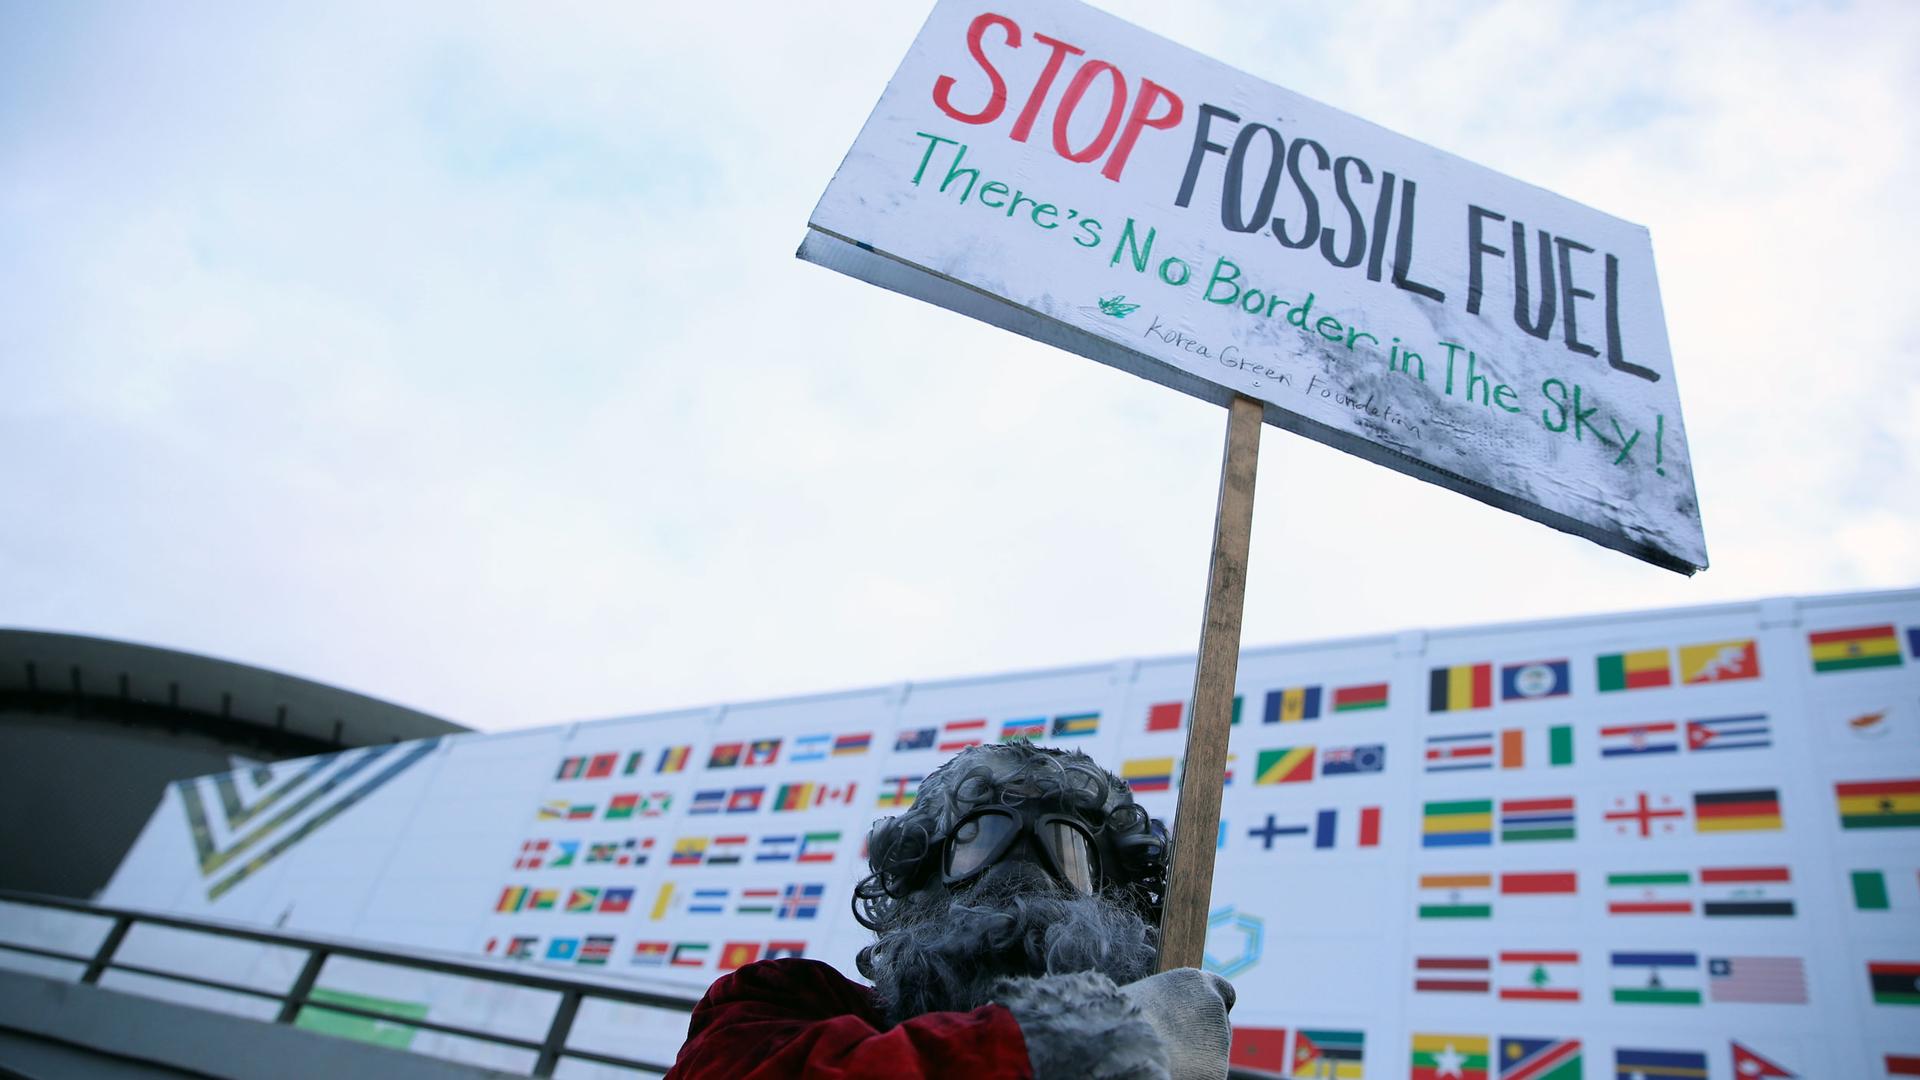 A man wearing googles holds up a sign that says "stop fossil fuel! there is no border in the sky!"